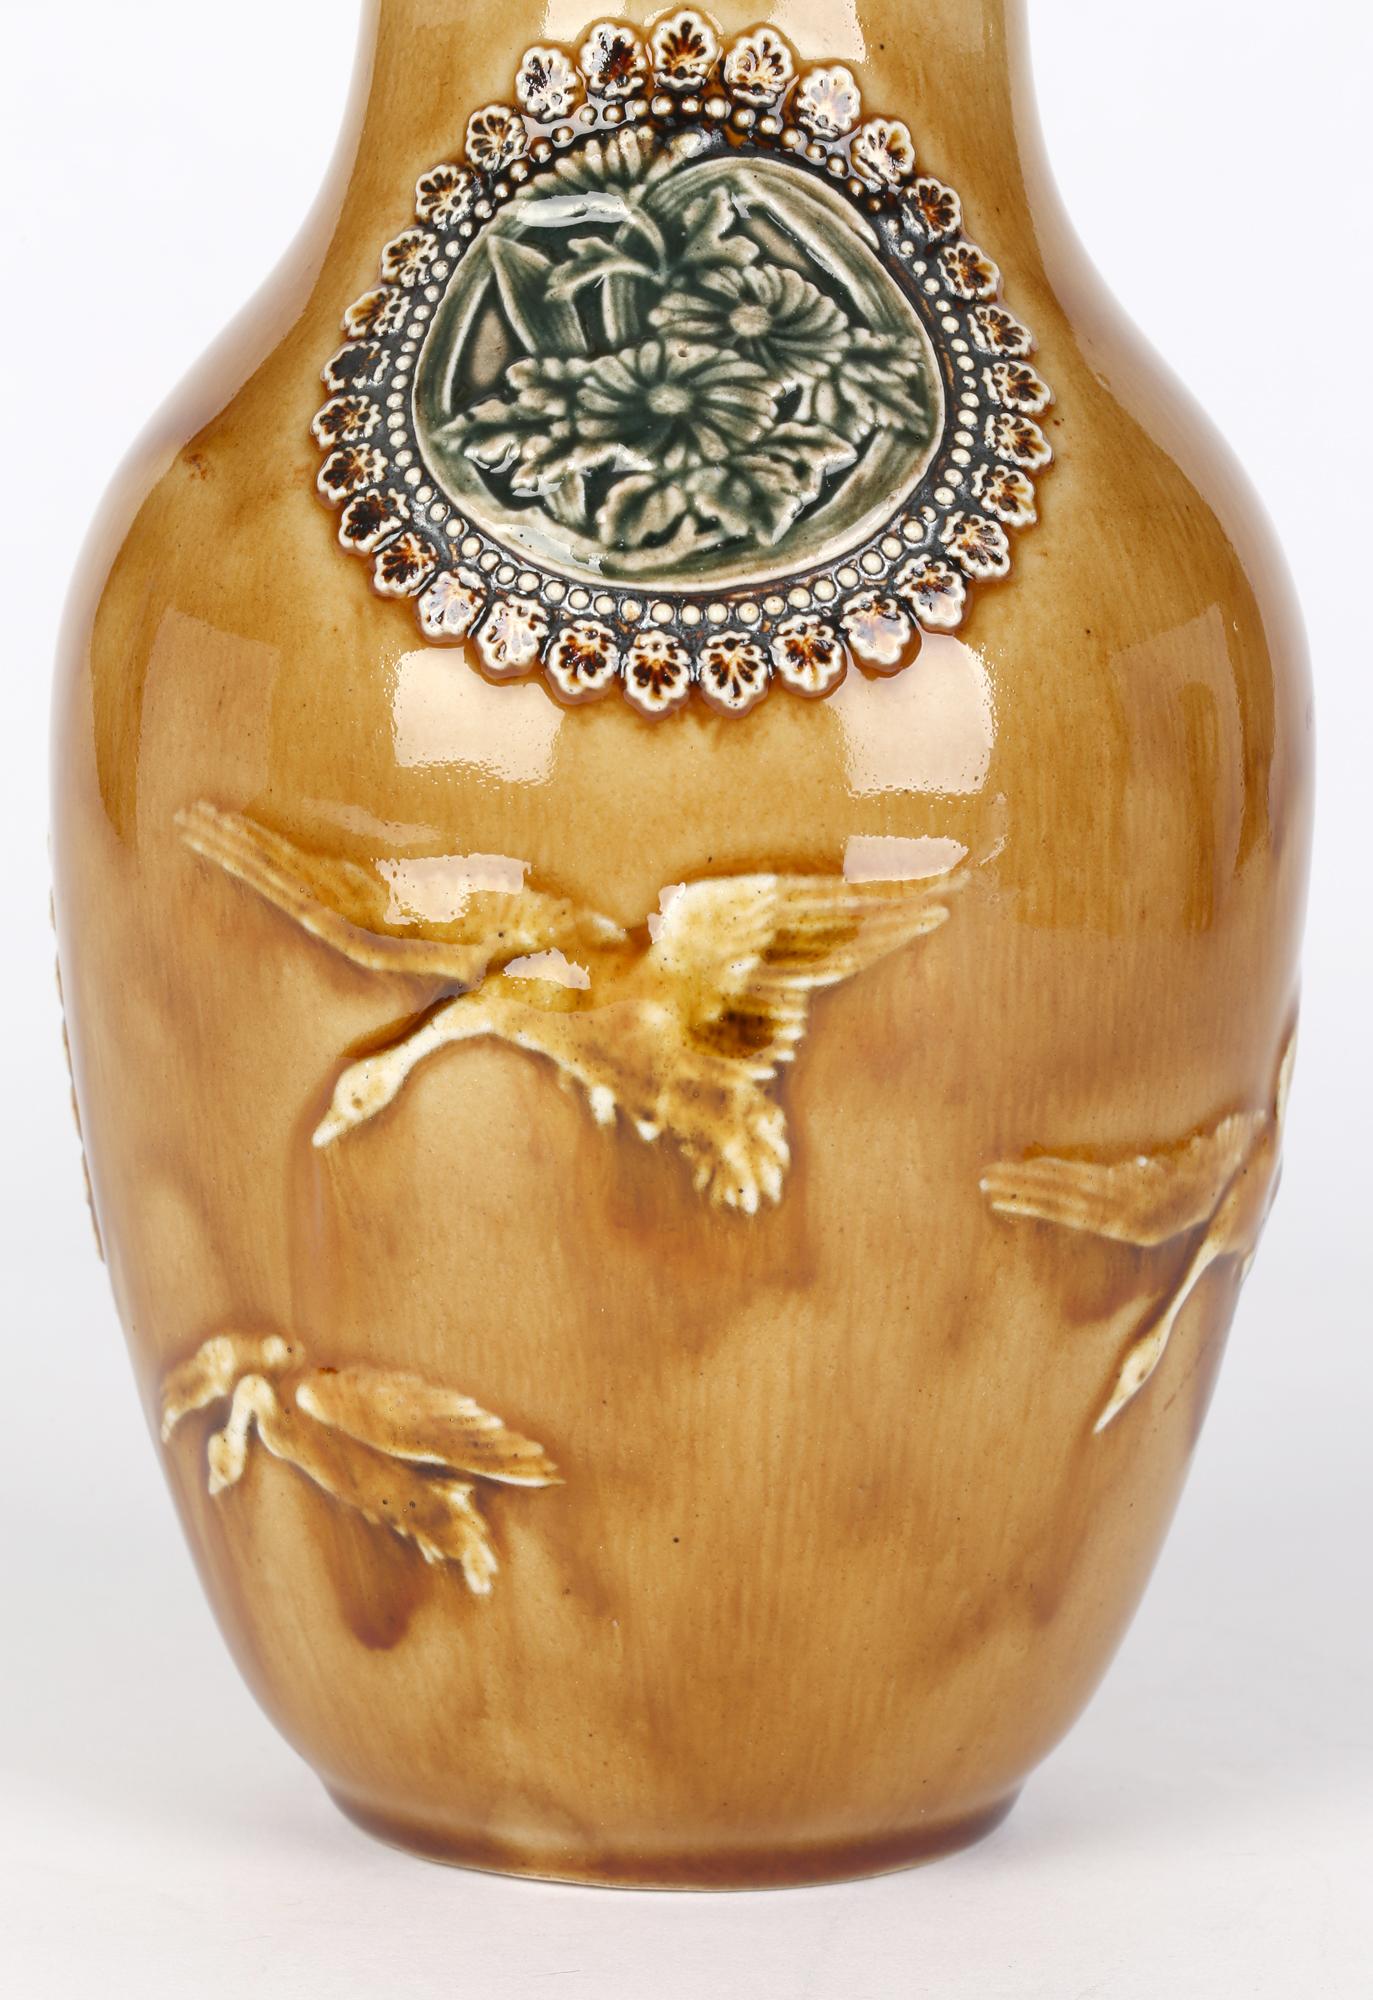 Doulton Lambeth Aesthetic Movement Vase with Geese by Lizzie Axford 9